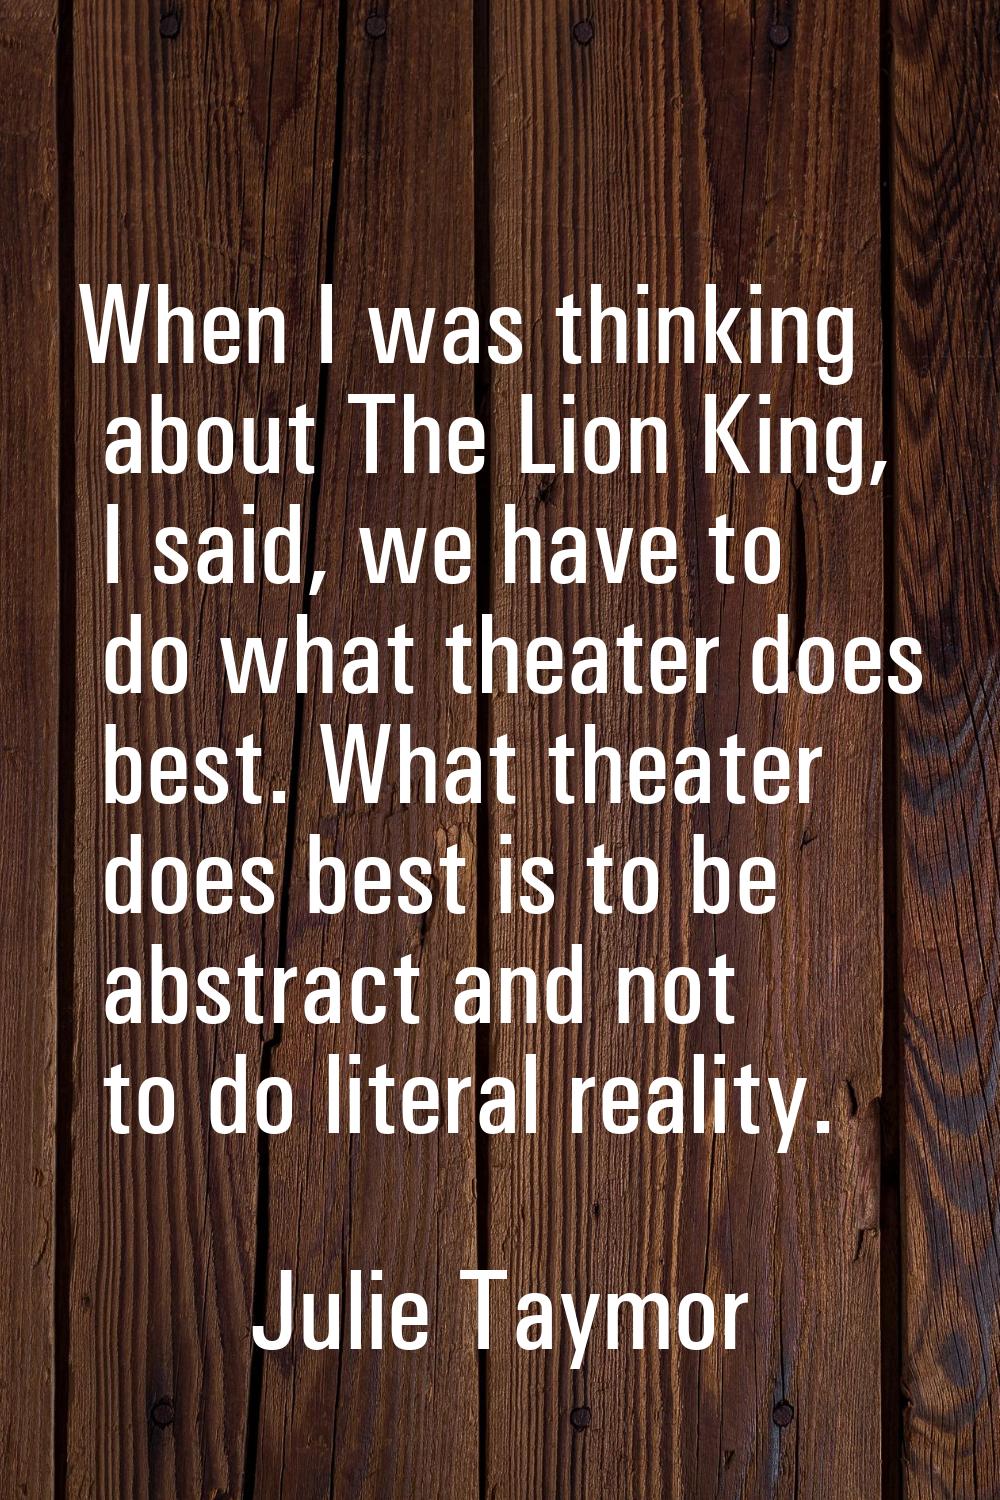 When I was thinking about The Lion King, I said, we have to do what theater does best. What theater